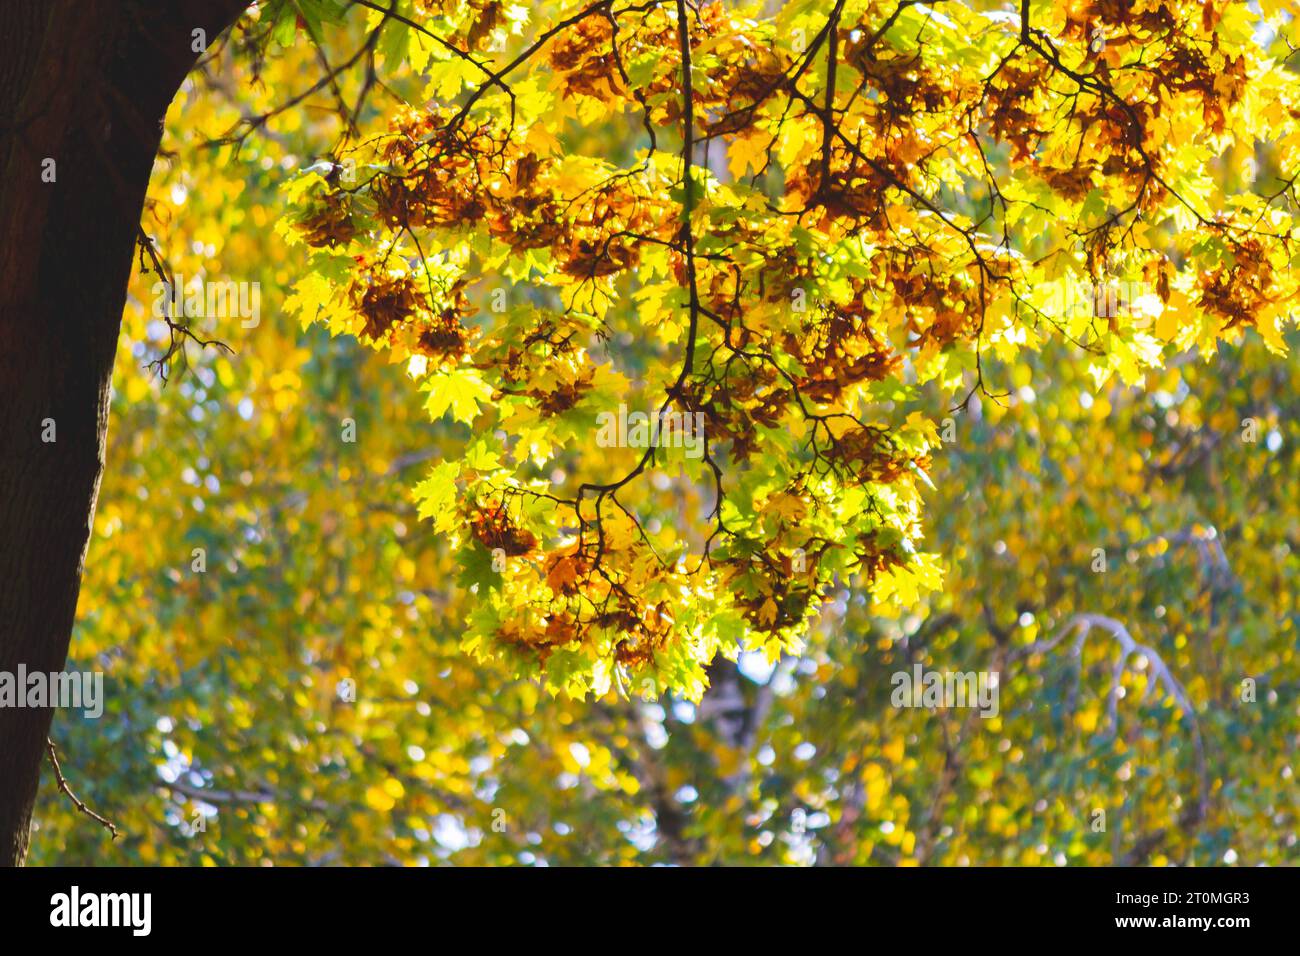 Yellow autumn leaves on tree glow brightly in sun's rays.. Stock Photo